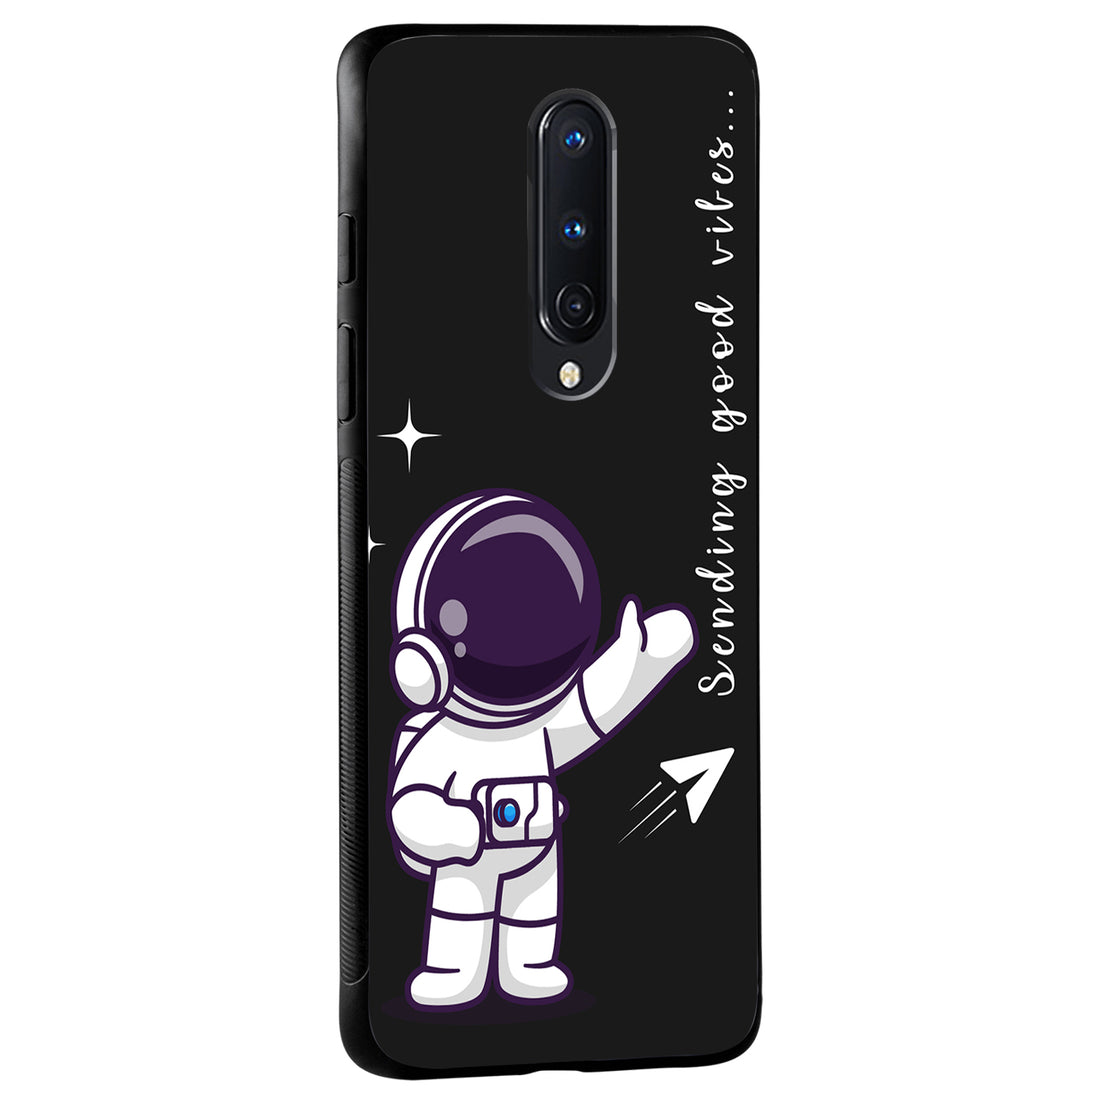 Spending Good Vibes Bff Oneplus 8 Back Case